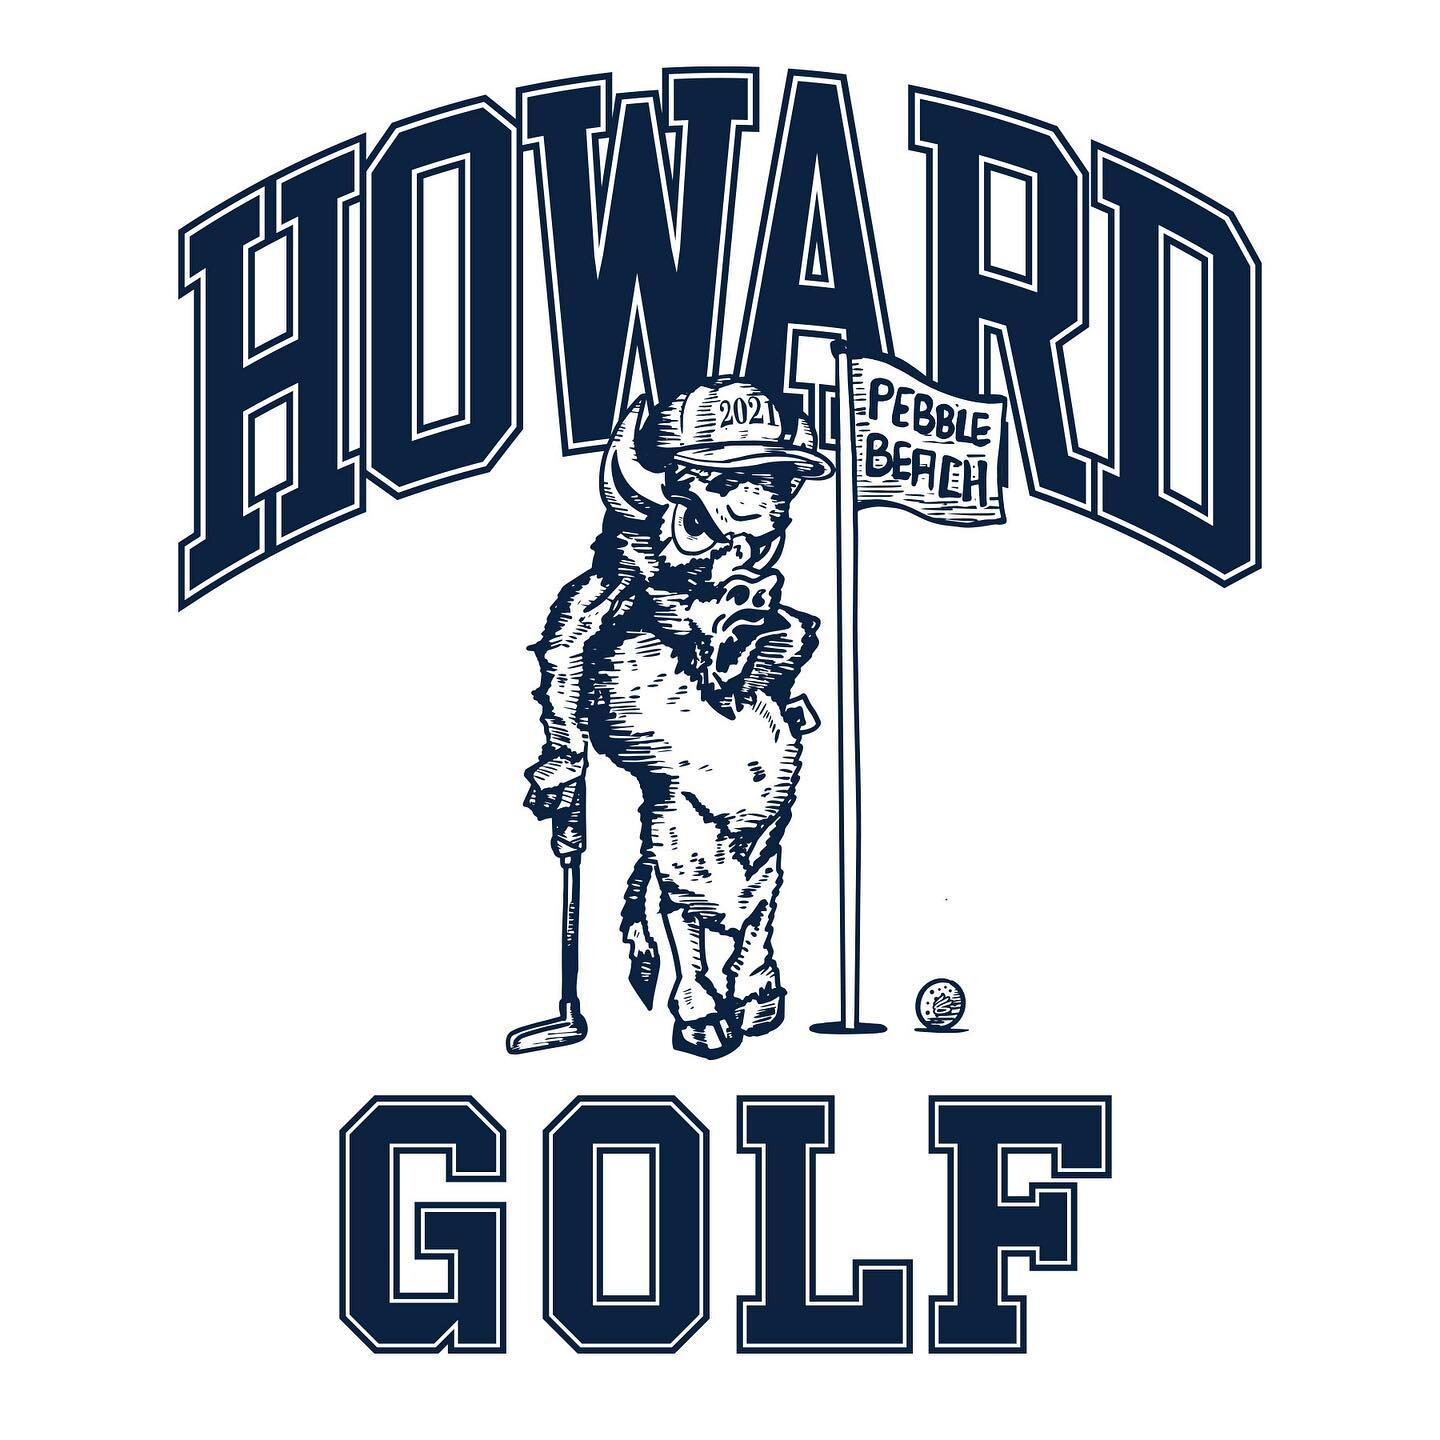 Howard Golf Illustration for Curry Brand. Created for the &ldquo;Bison at the Beach Inaugural Golf Classic&rdquo; at Pebble Beach this past weekend. 
Check the &ldquo;DOC BLOG&rdquo; link in my bio for more info. (Sorry not for sale)
.
.
 &bull; #doc